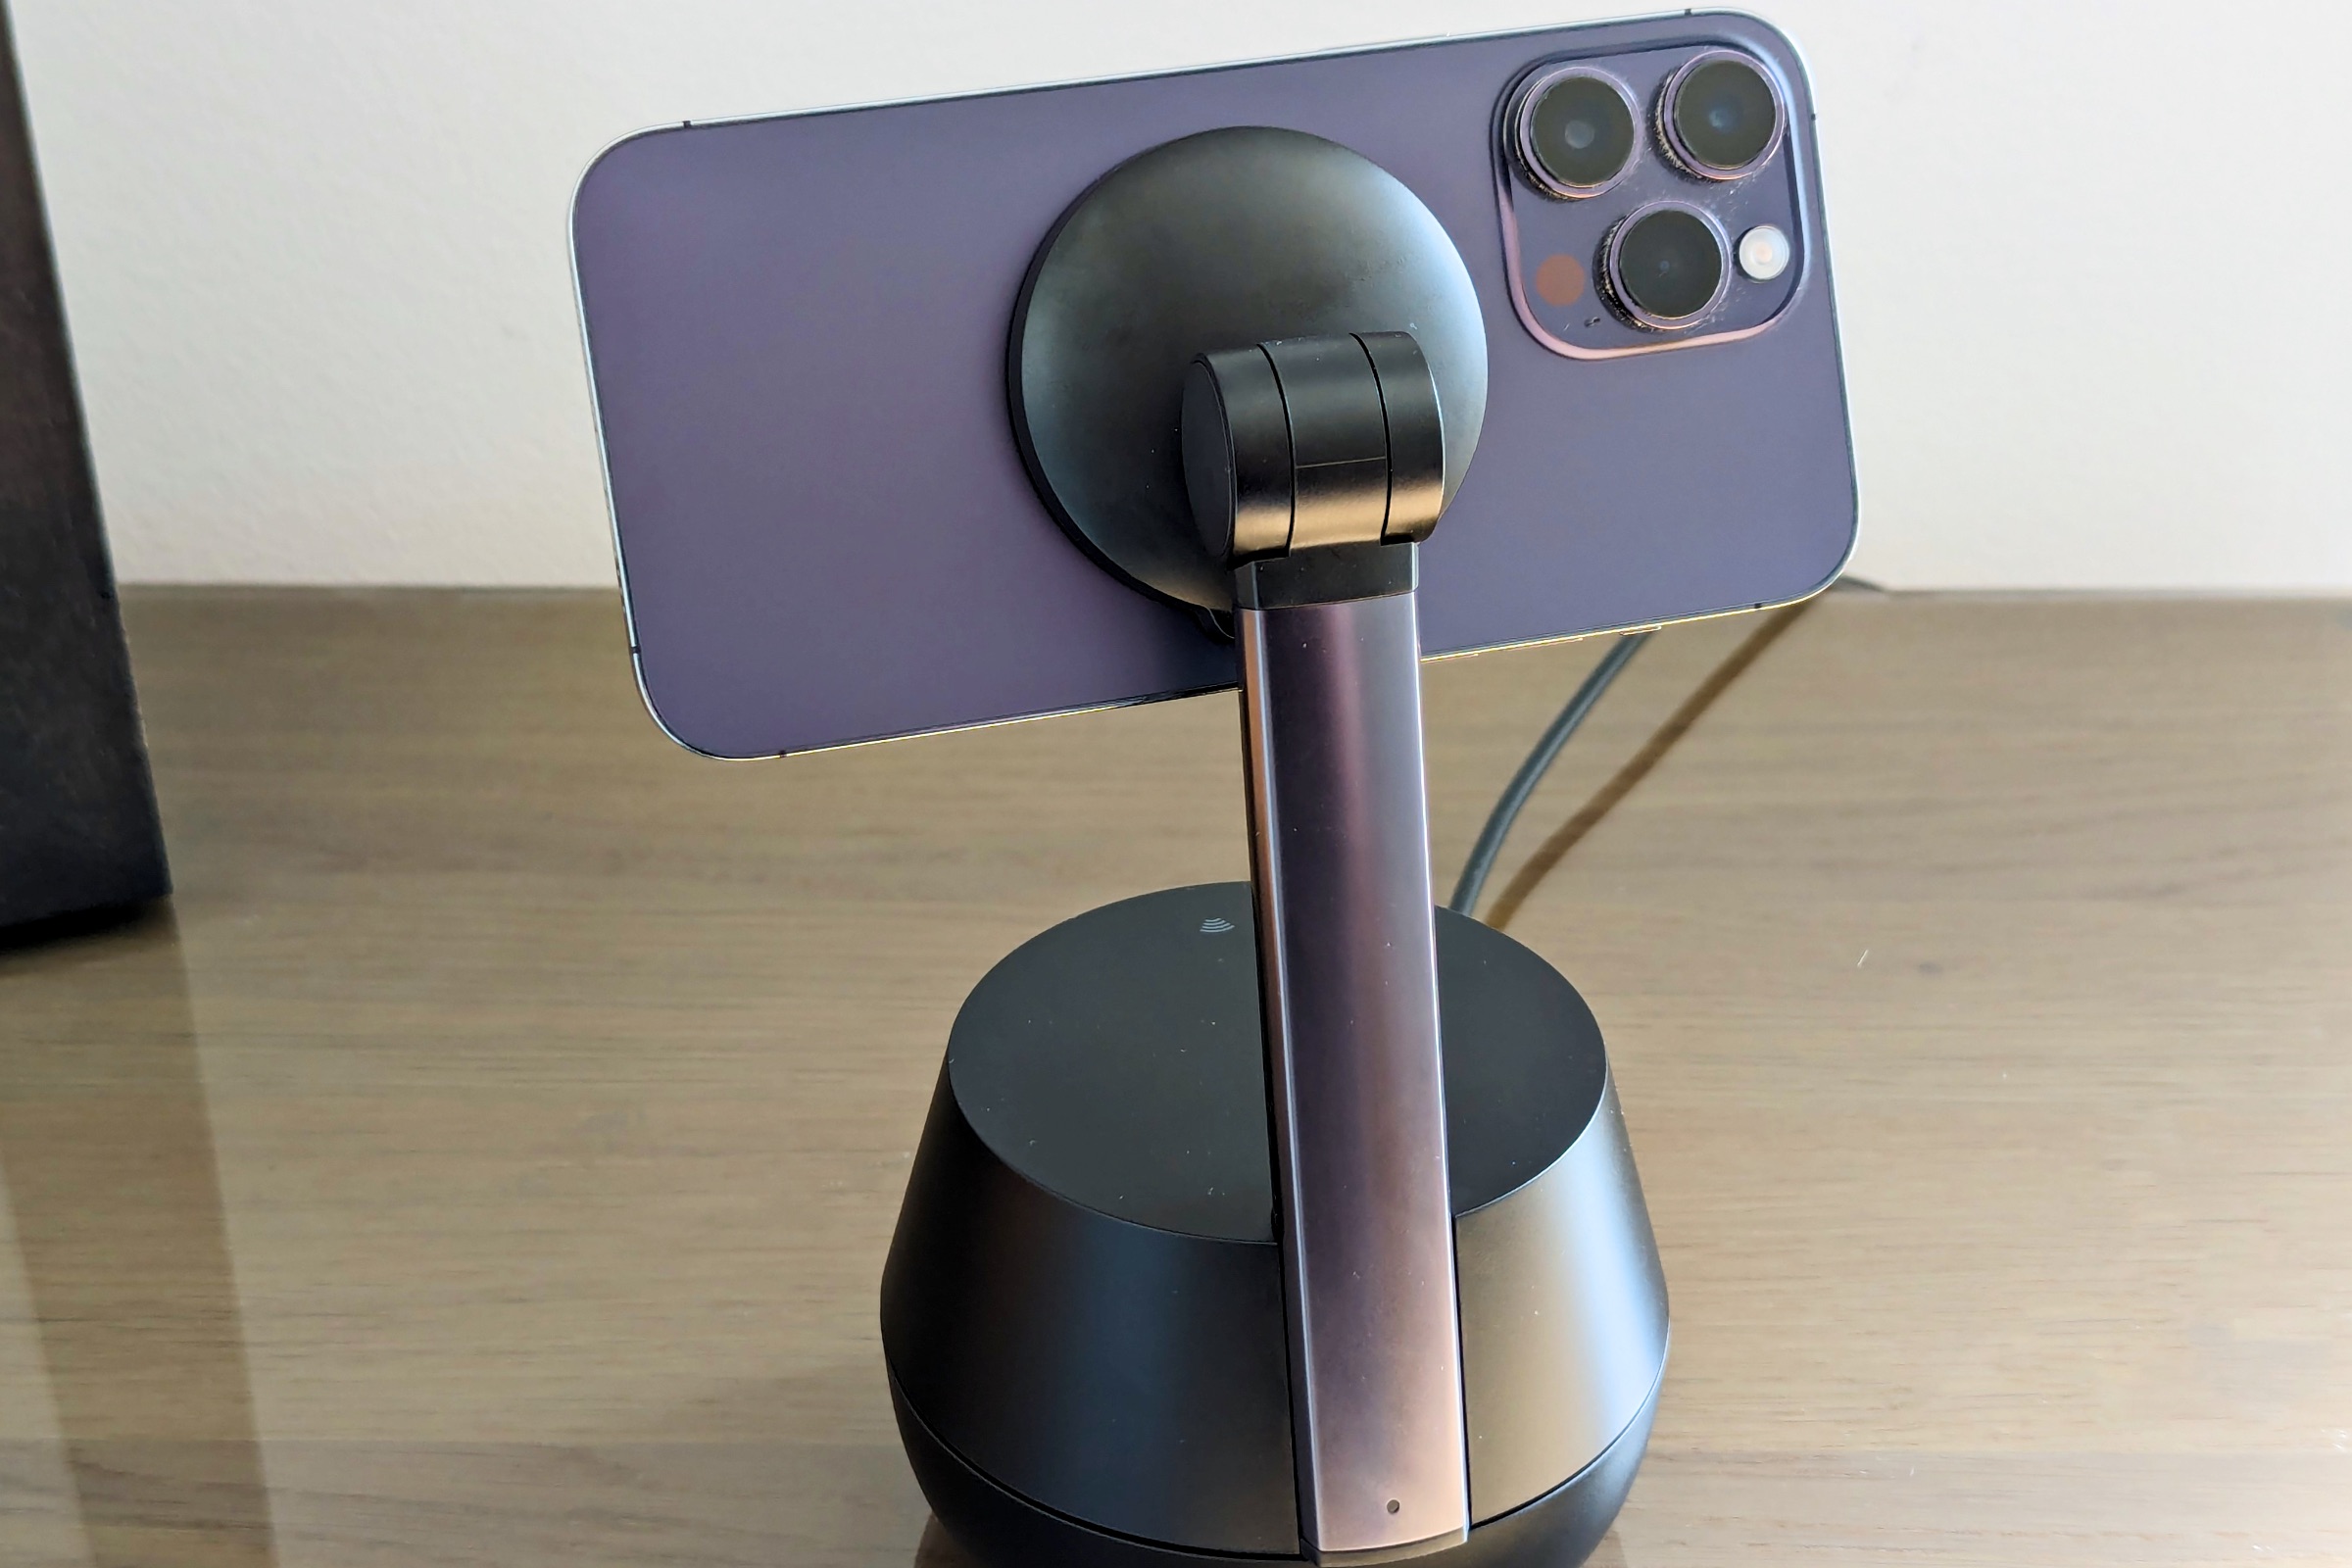 Belkin Stand Pro with iPhone 14 Pro Max mounted and rear camera showing.